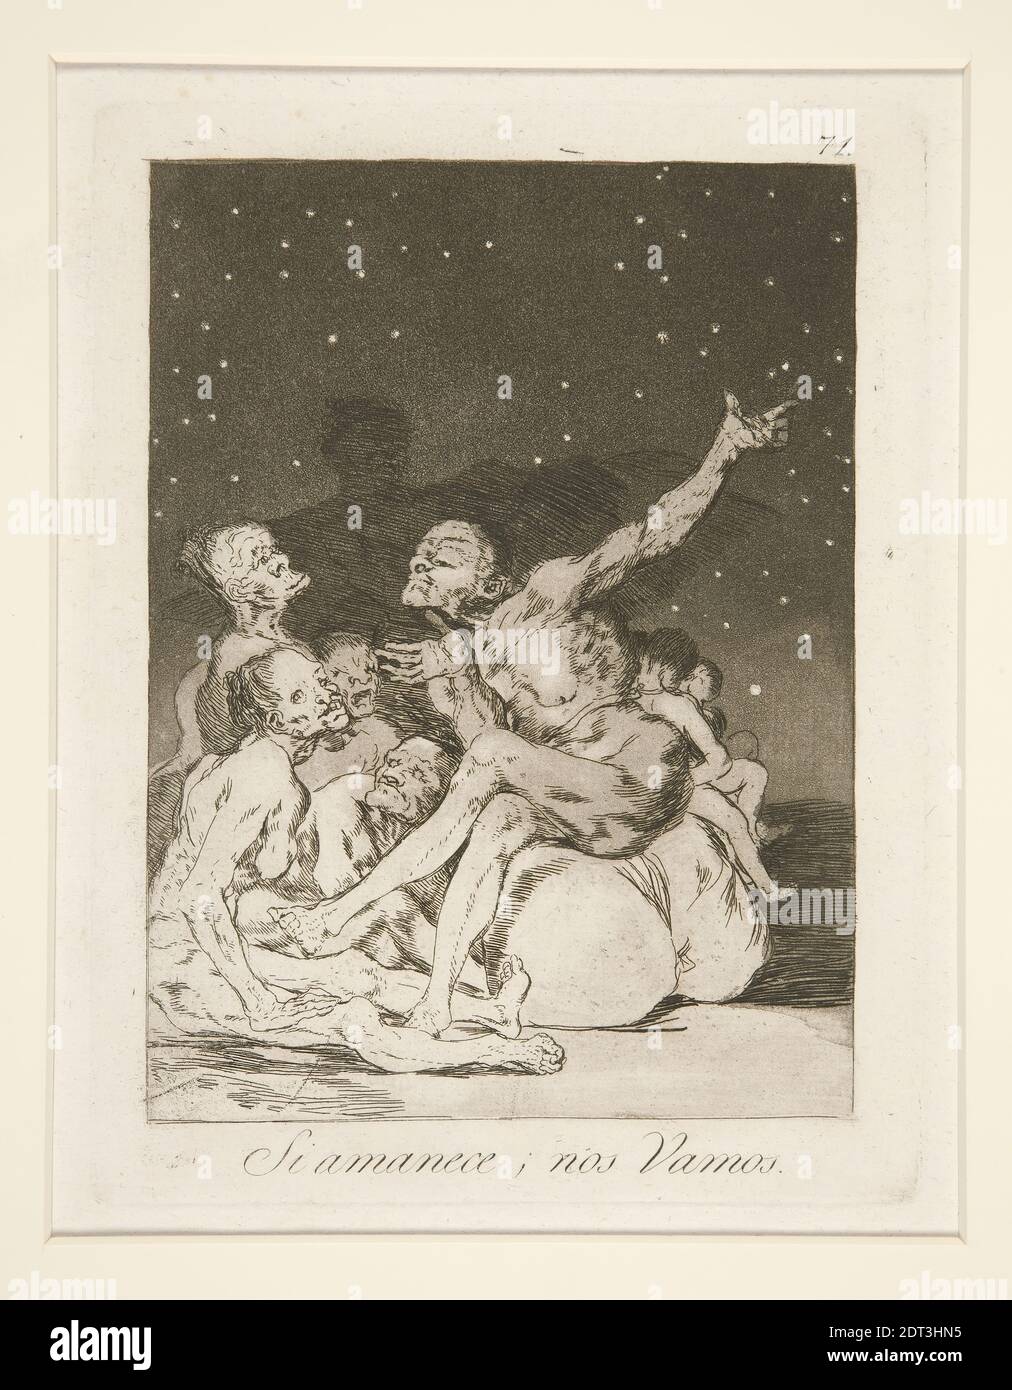 Artist: Francisco Goya, Spanish, 1746–1828, Si amanece, nos vamos (When Day Breaks We Will Be Off), pl. 71 from the series Los caprichos, Etching and burnished aquatint; first edition, platemark: 19.7 × 15 cm (7 3/4 × 5 7/8 in.), Made in Spain, Spanish, 18th century, Works on Paper - Prints Stock Photo